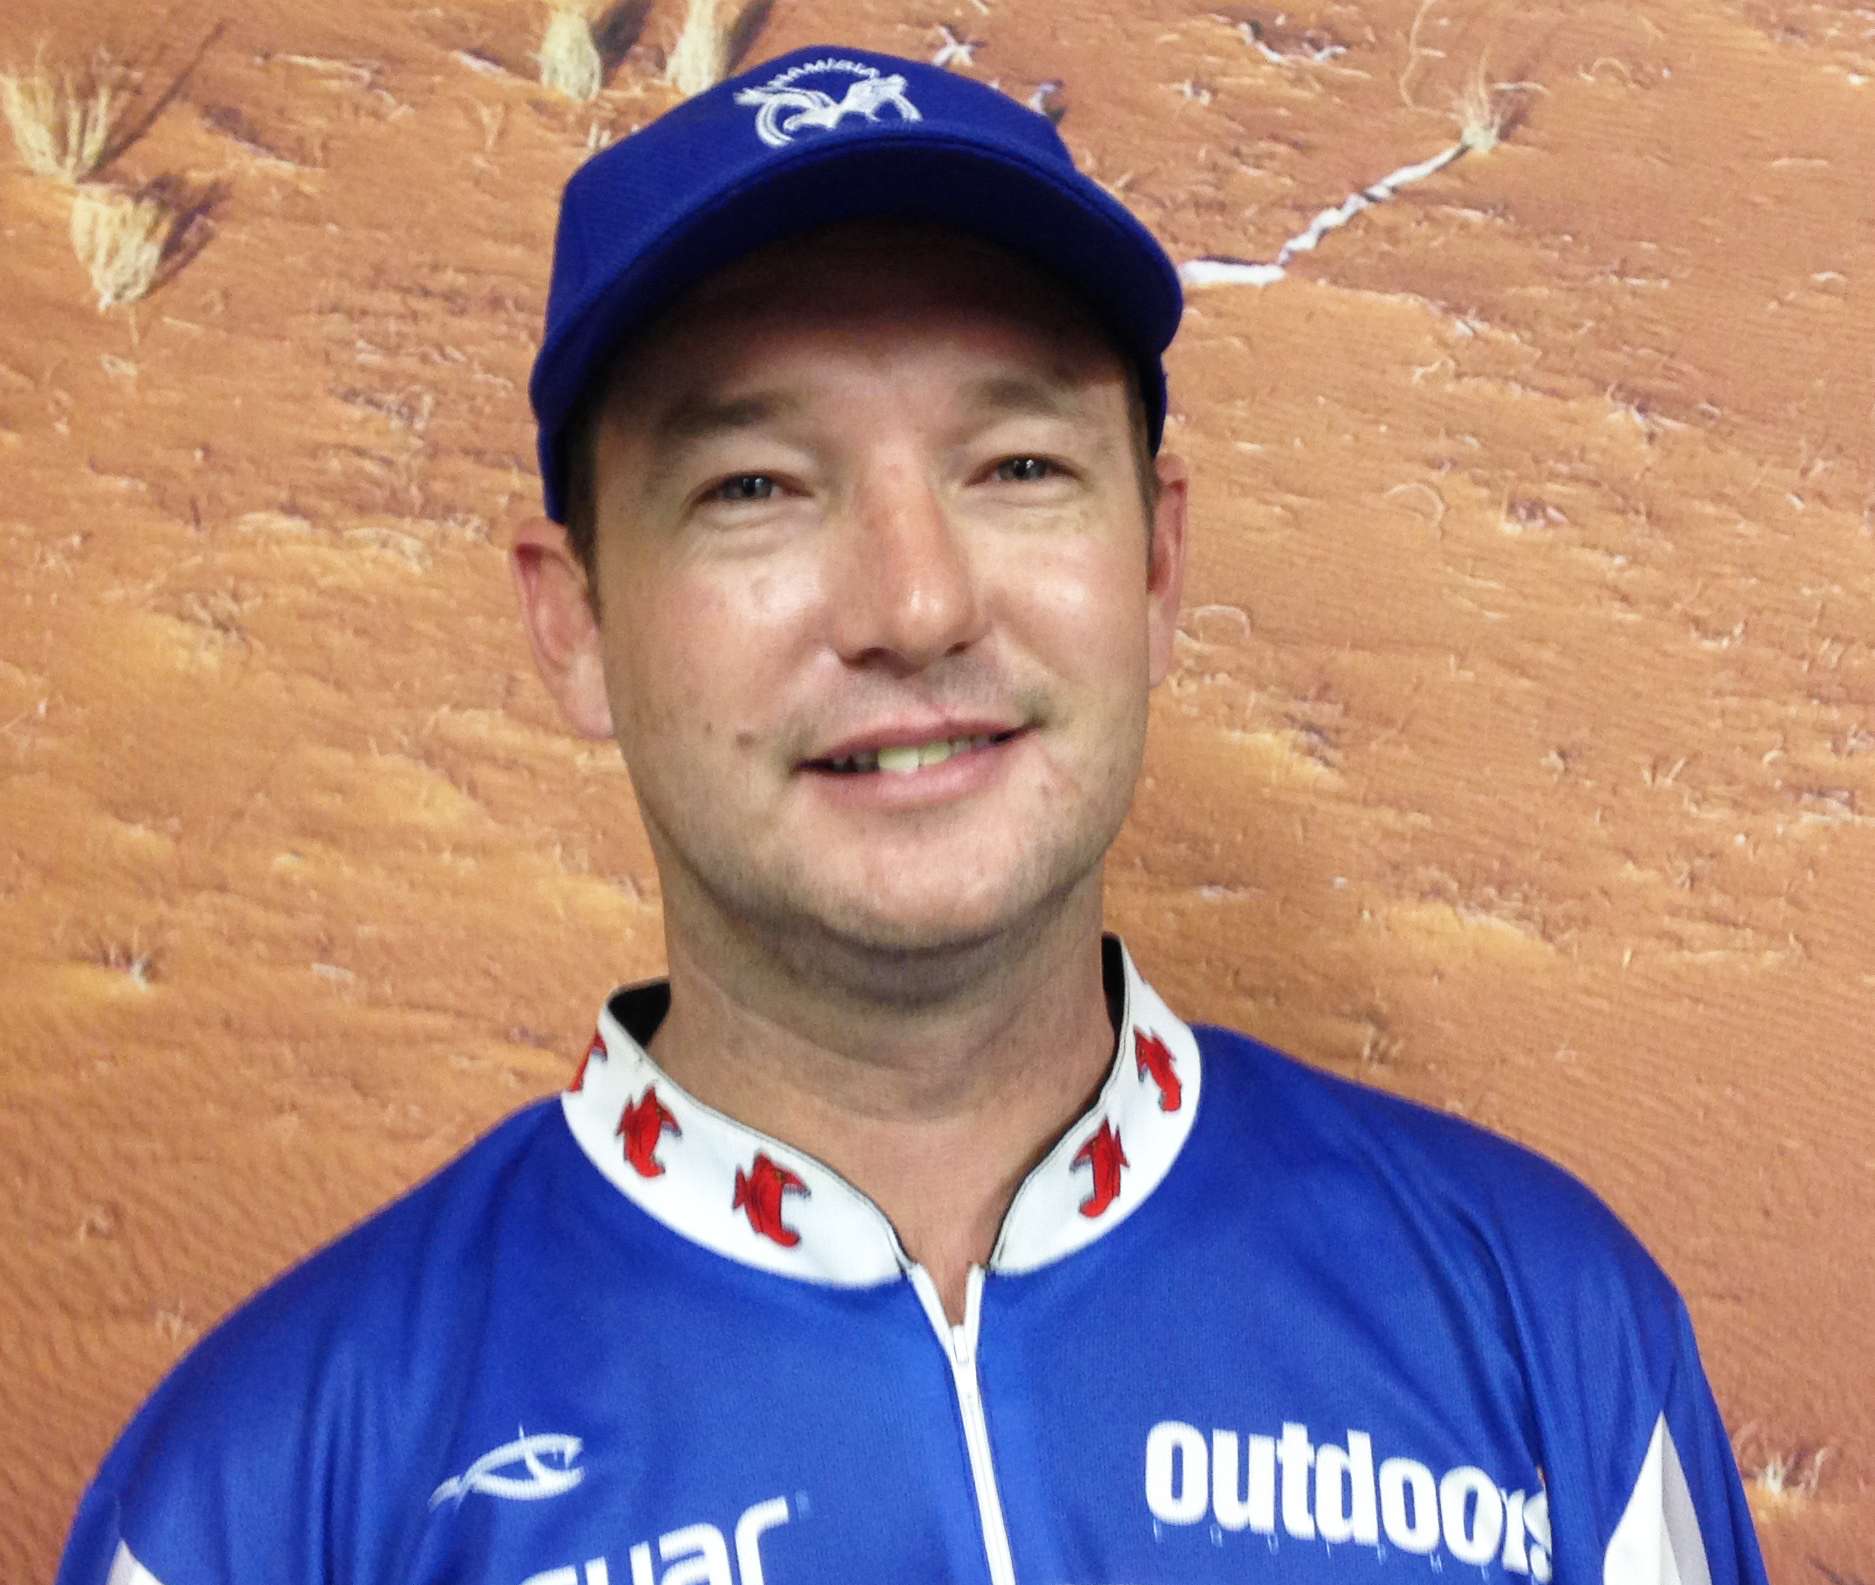 Alec Williams is Namibia's second-ever representative in the championship. He'll be coming all the way from Africa, where he's a member of the Namibian Bass Anglers Association, for this opportunity. He works as an insurance broker there, and he likes hunting and playing golf.